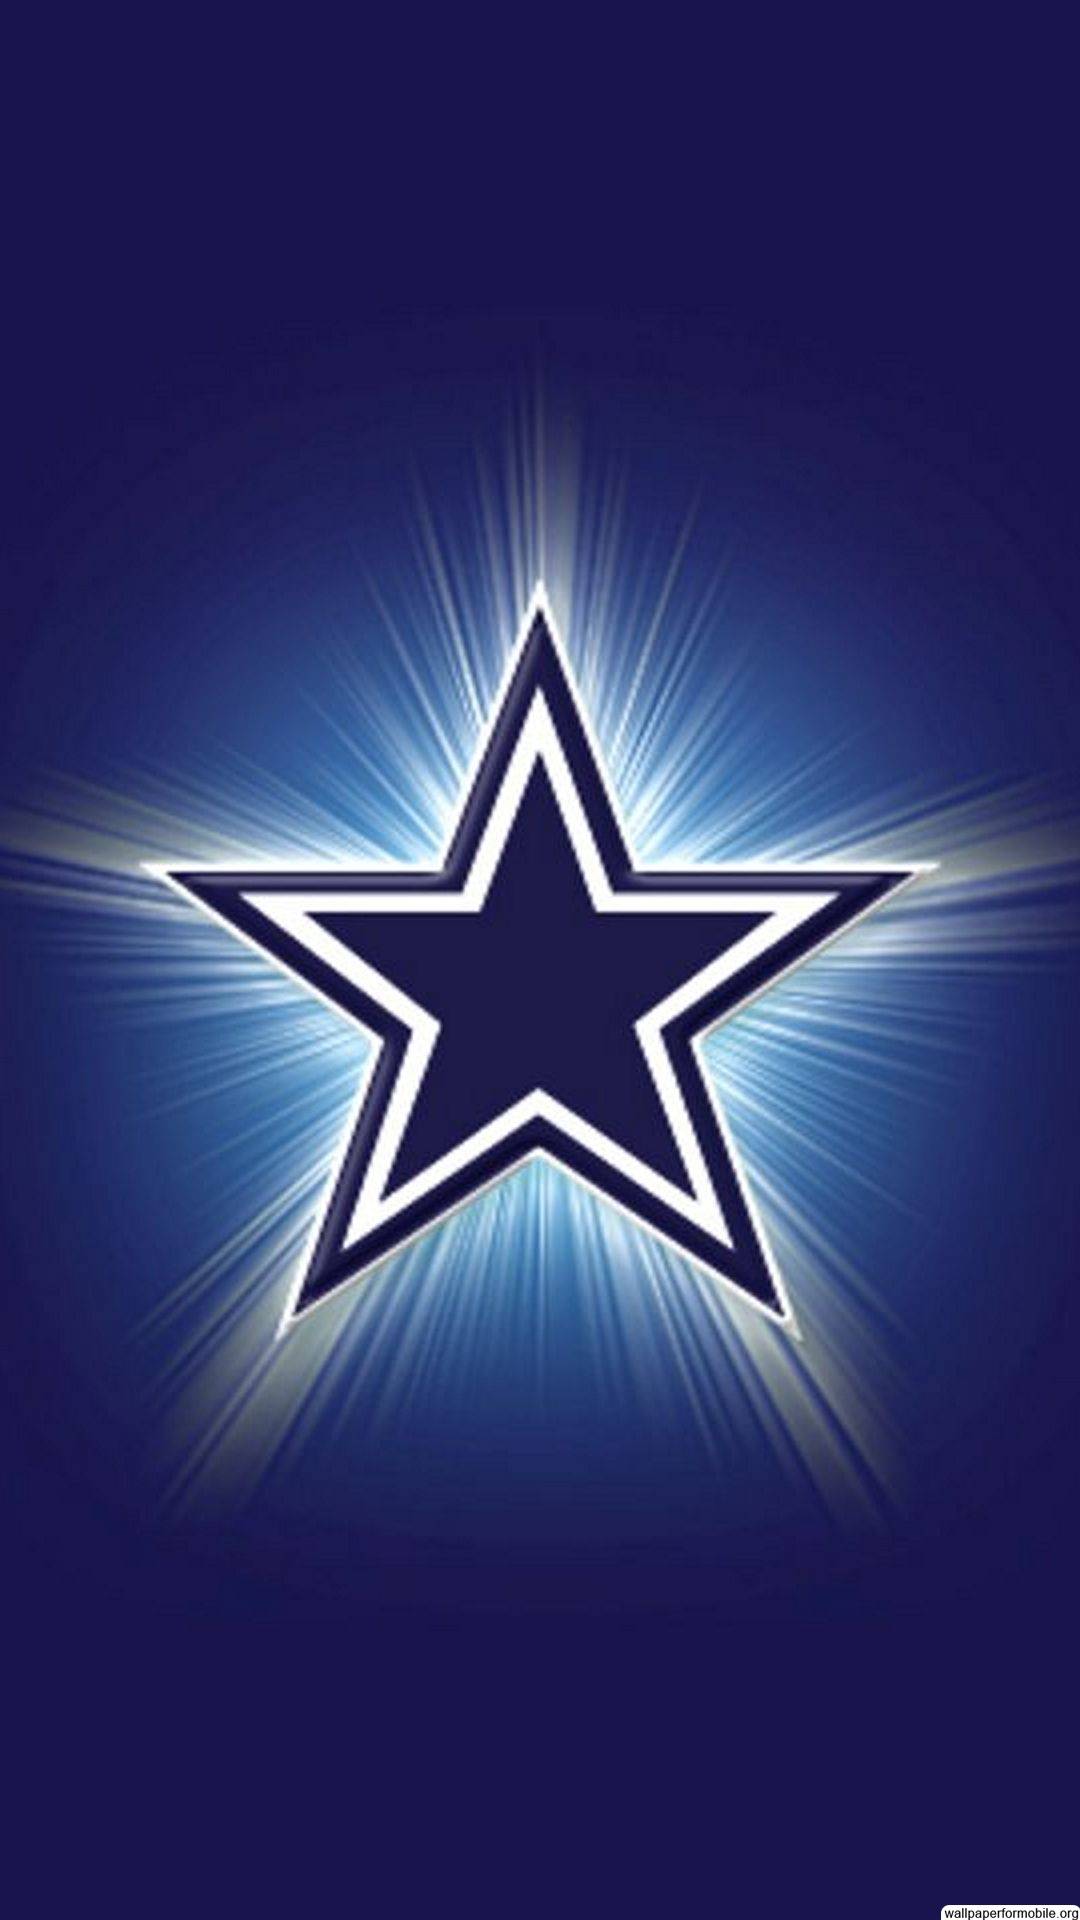 Dallas Cowboys Wallpaper For iPhone. Wallpaper for Mobile